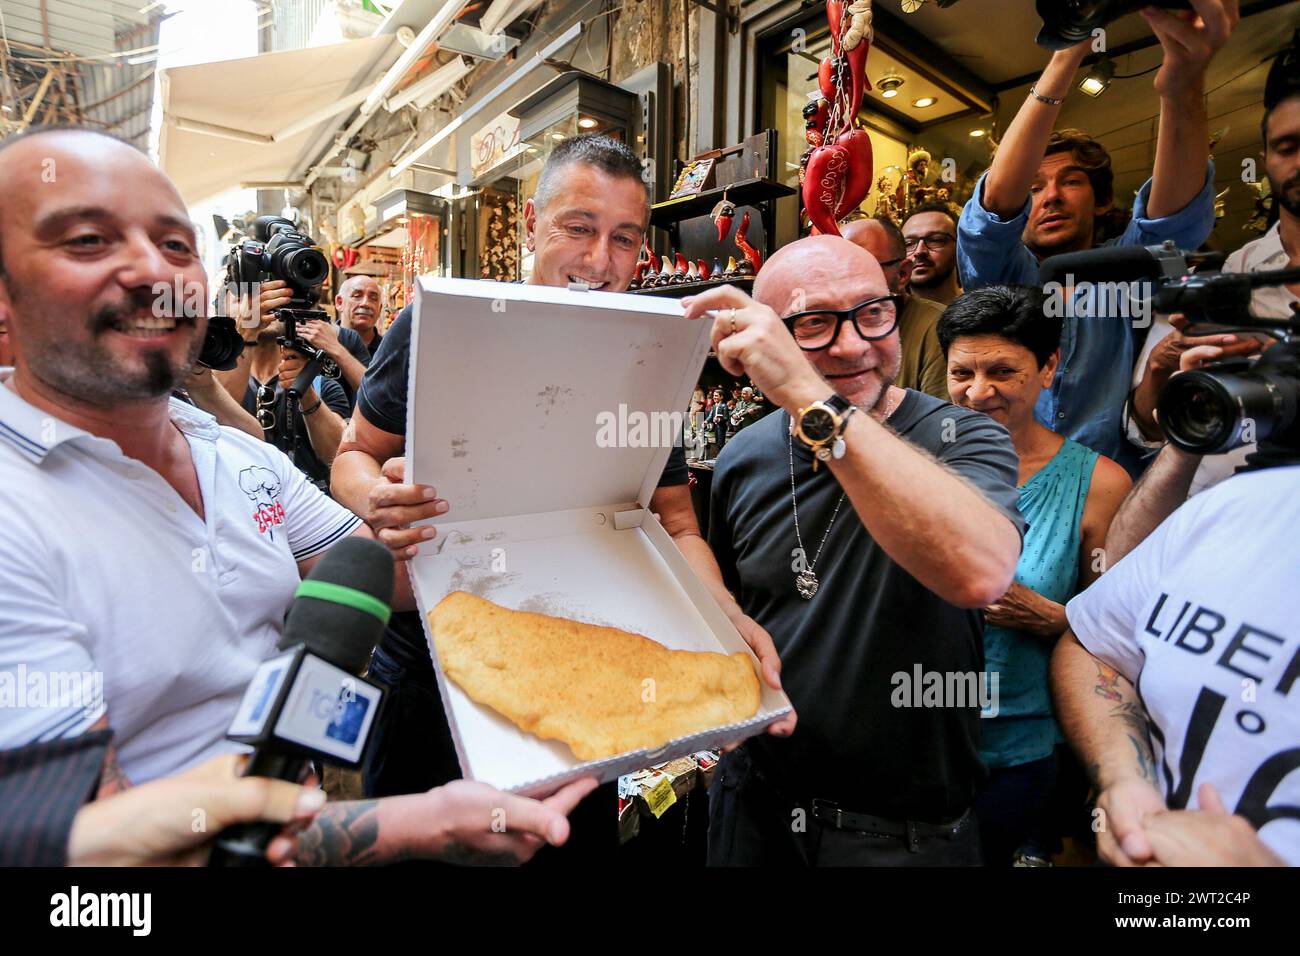 The Dolce & Gabbana stylists walking around San Gregorio Armeno in Naples with a fried pizza, a pizza chef's gift Stock Photo